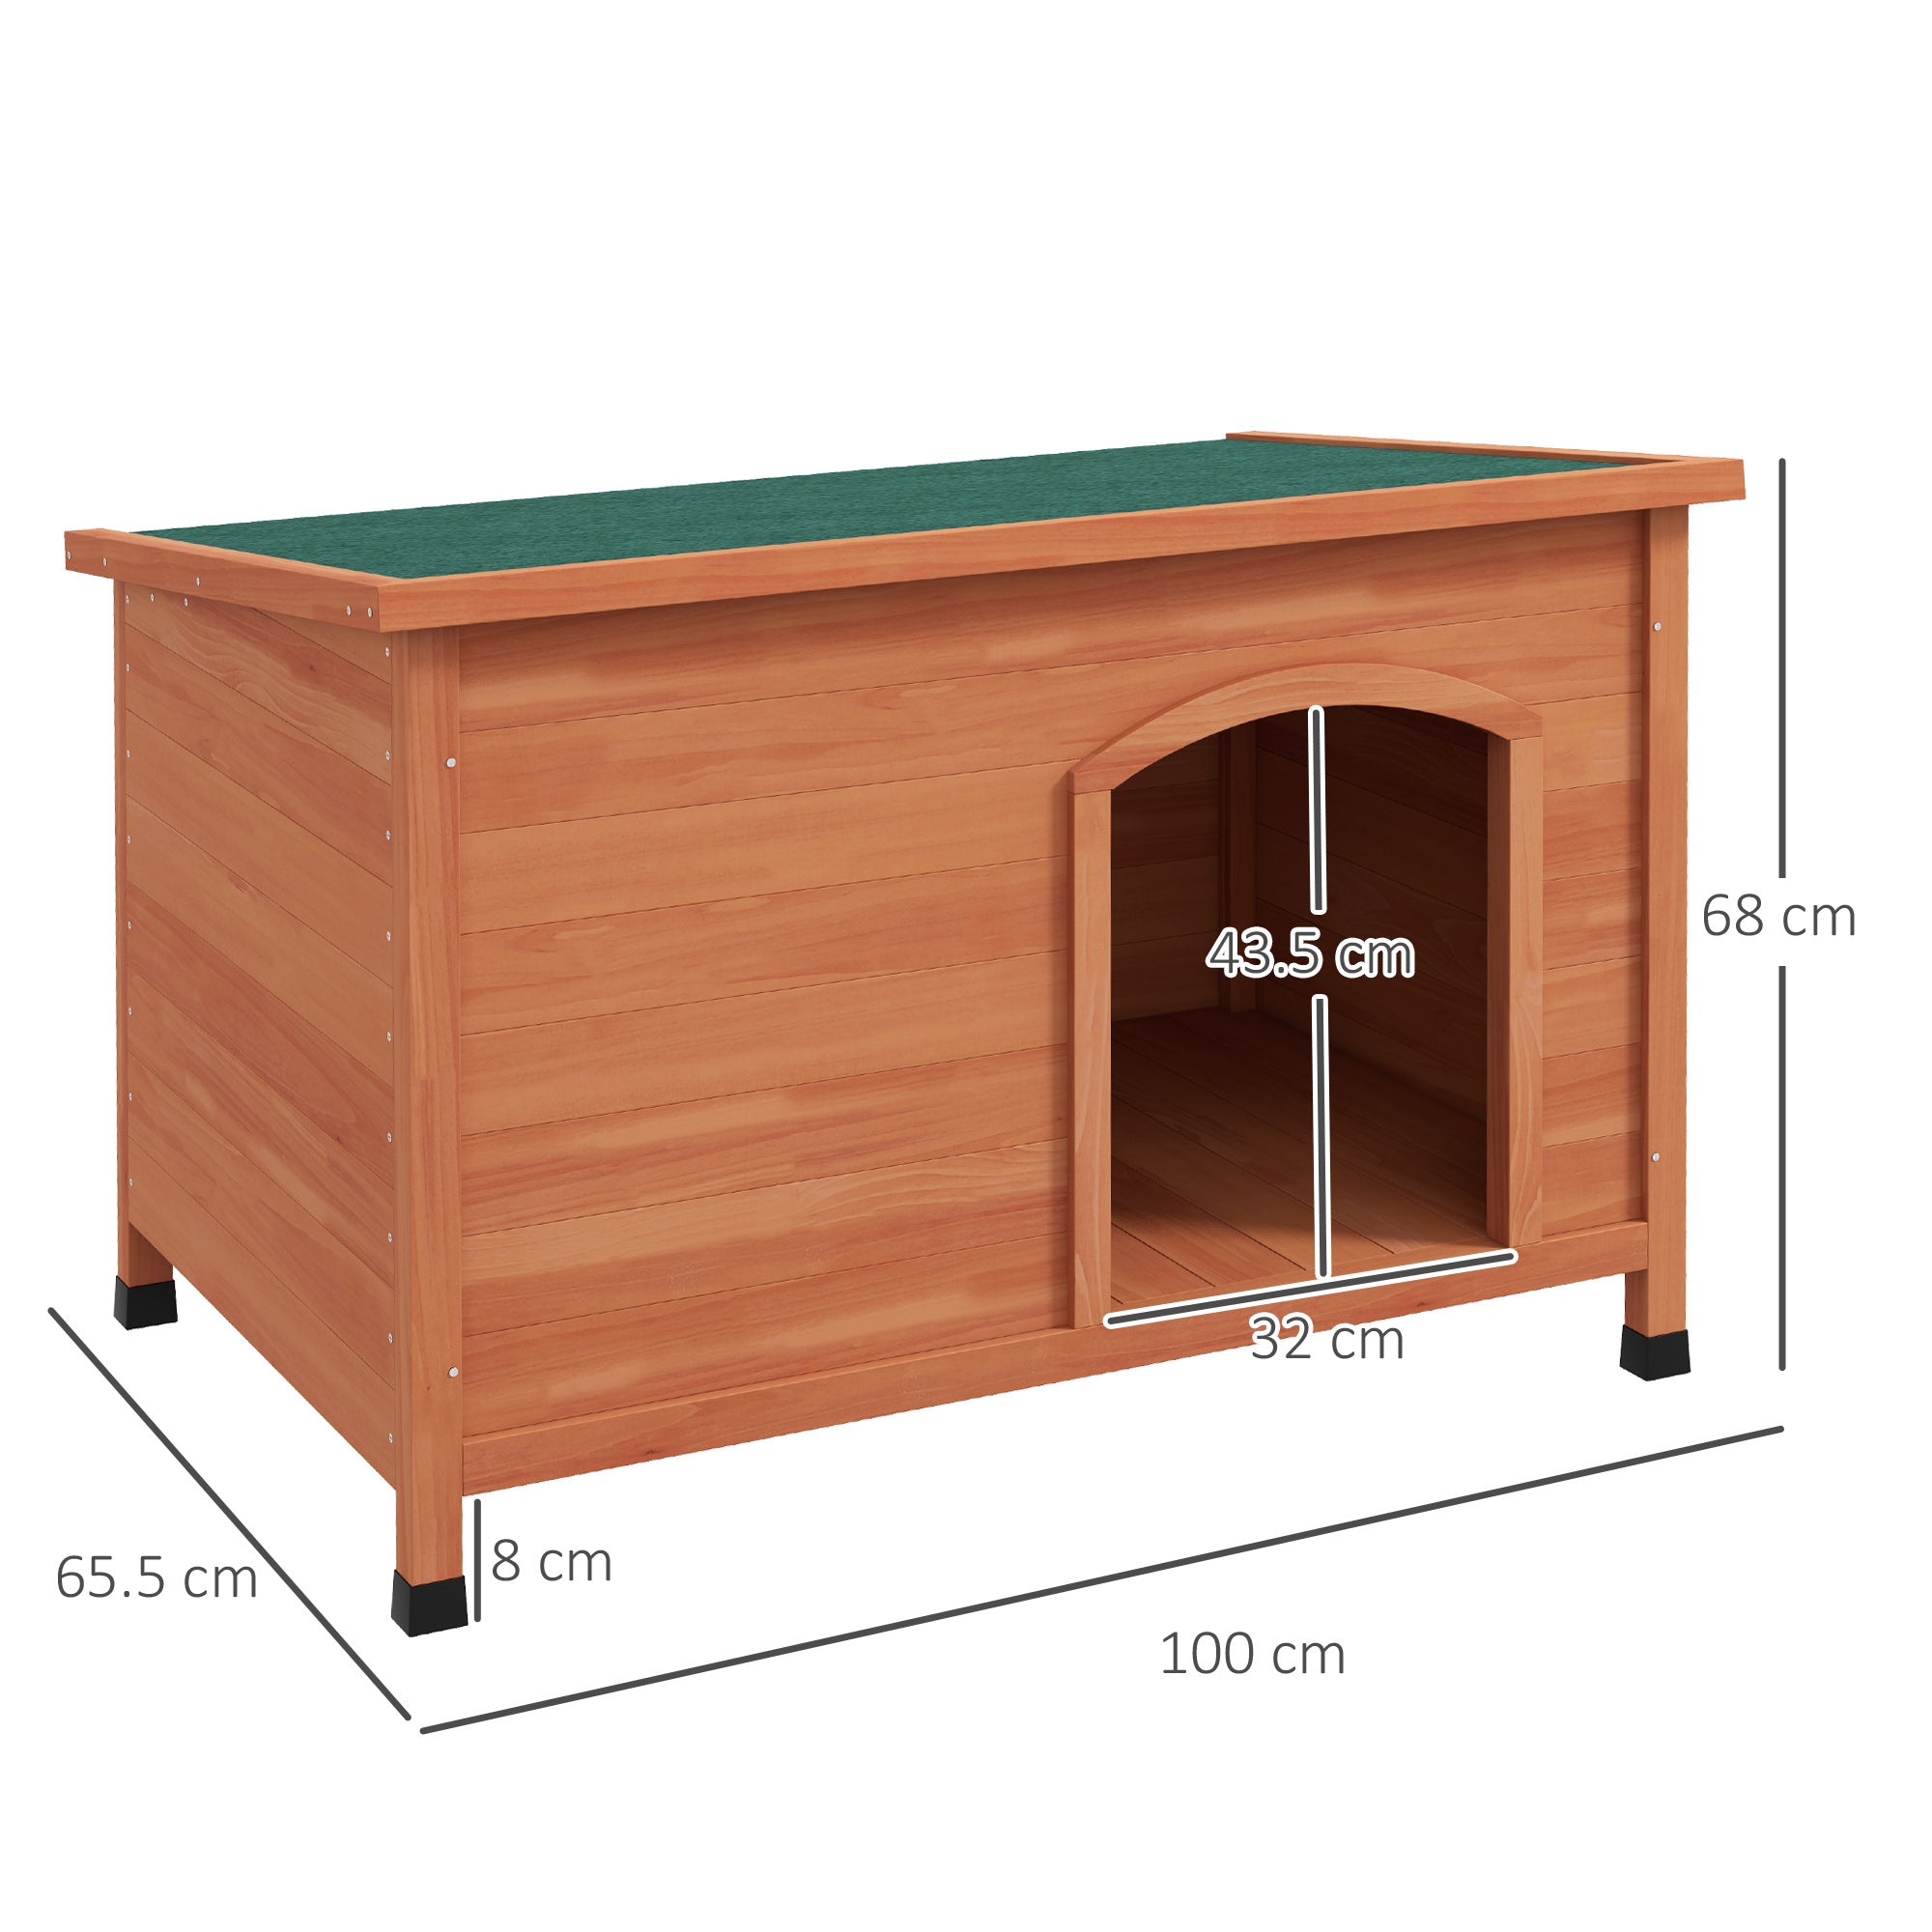 Wooden Dog Kennel, Outdoor Pet House, with Removable Floor, Openable Roof, Water-Resistant Paint - Natural Wood Tone-2